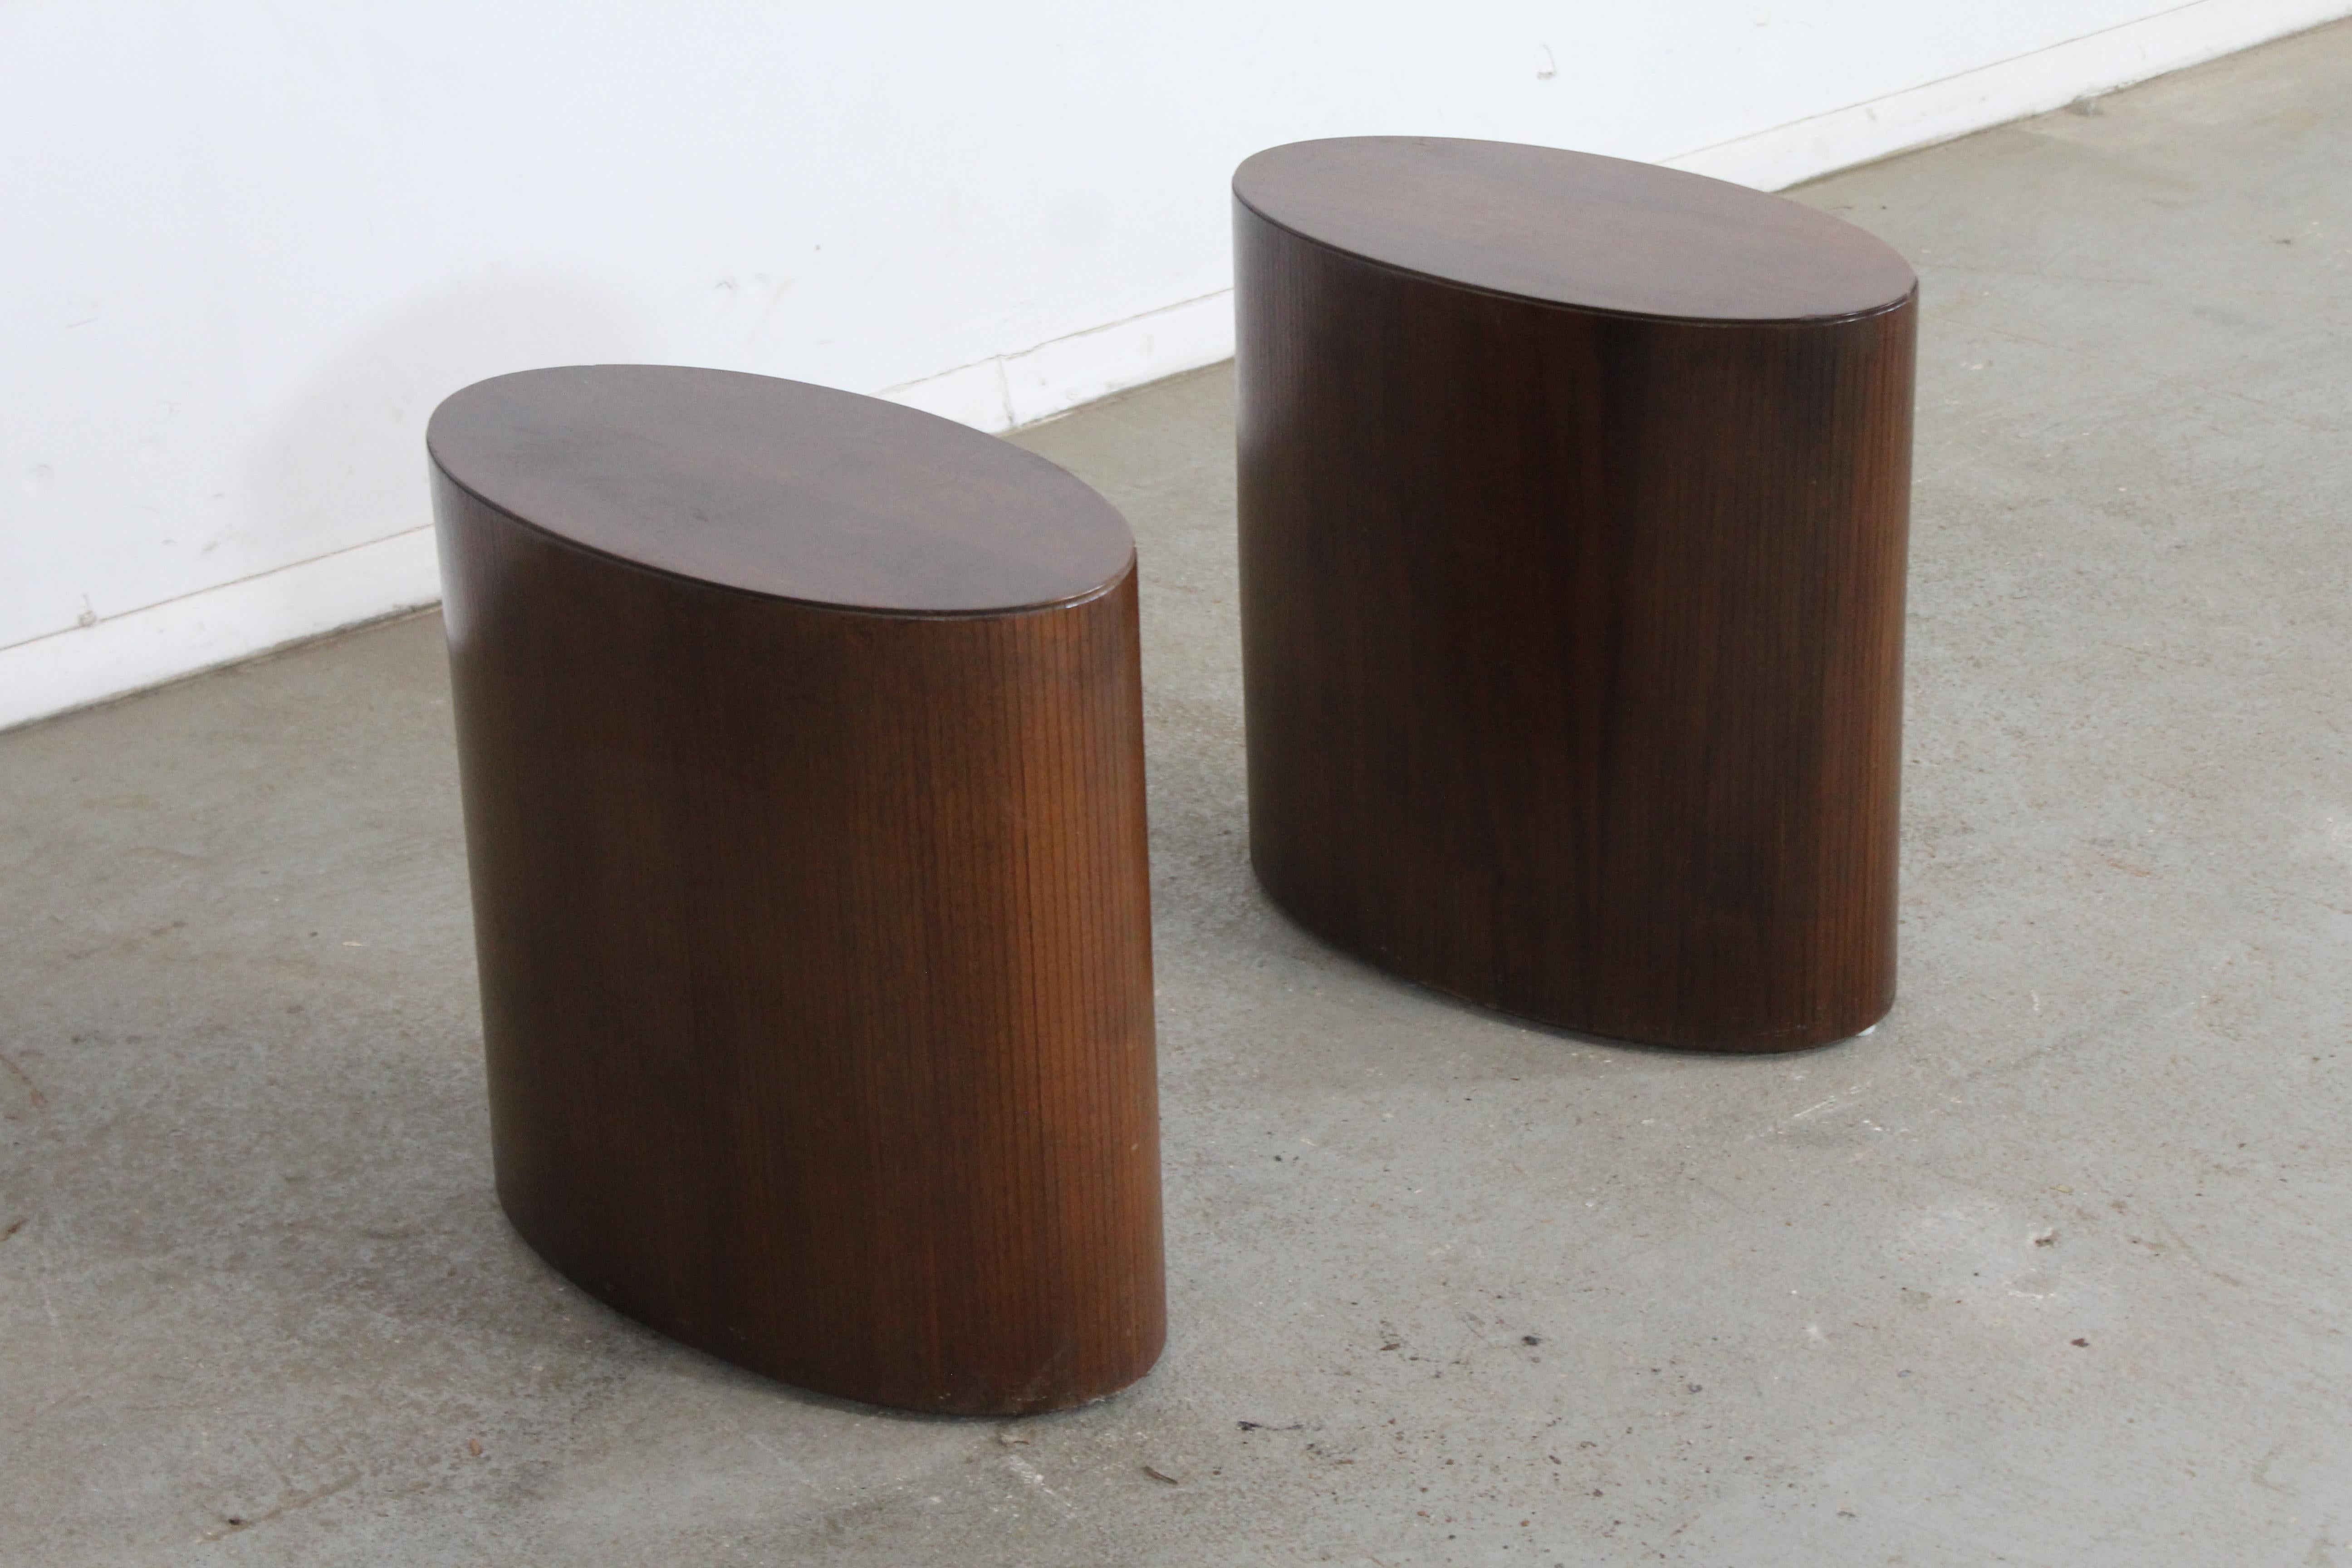 Pair of Mid-Century Modern Oval Walnut Pedestal/Stands/End Table by Lane For Sale 10